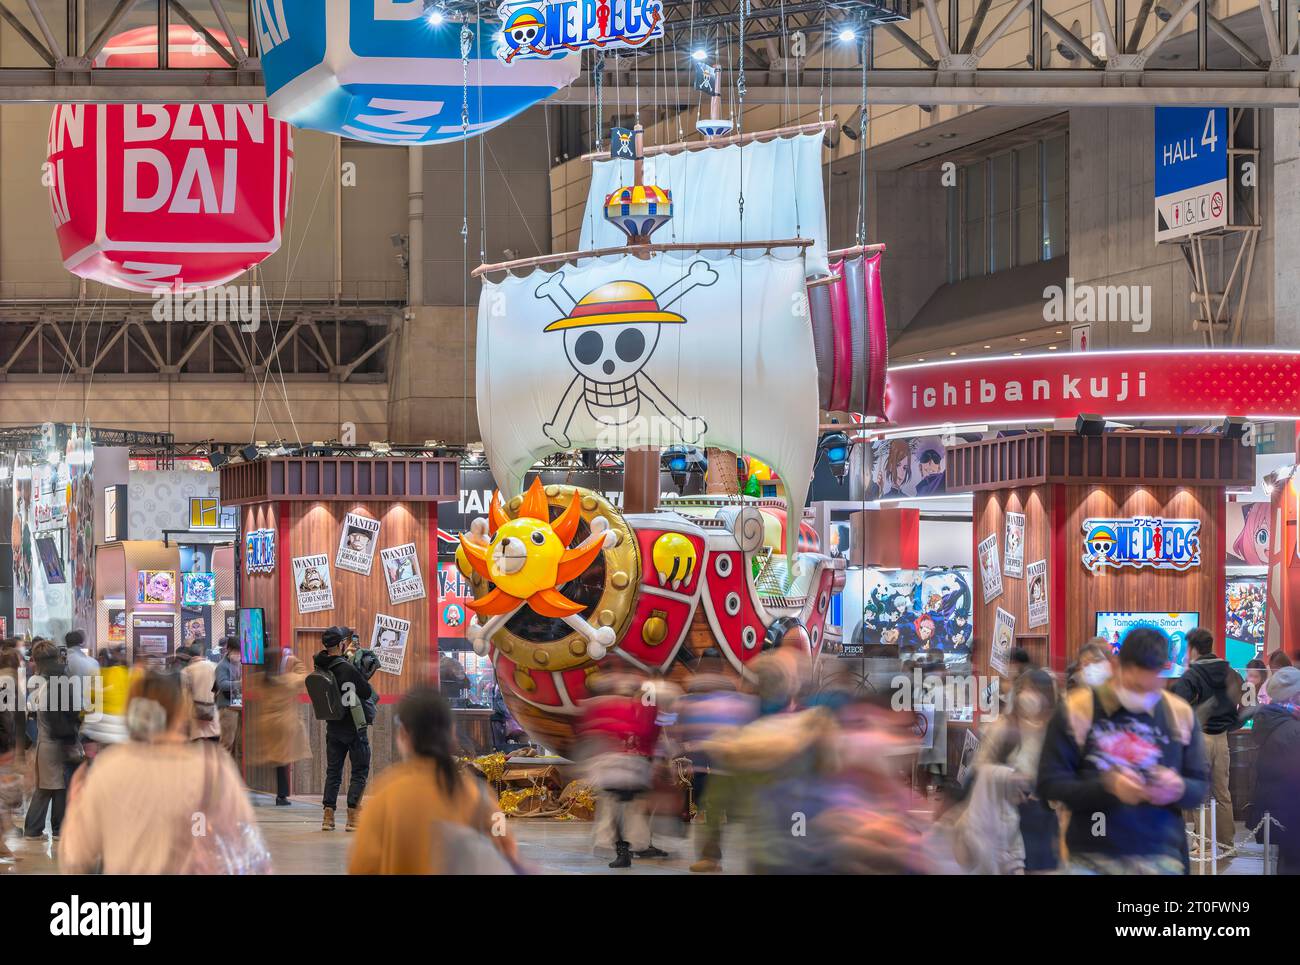 chiba, japan - dec 18 2022: Giant inflatable sculpture featuring the Thousand Sunny brigantine-type ship from the Japanese manga One Piece Stock Photo